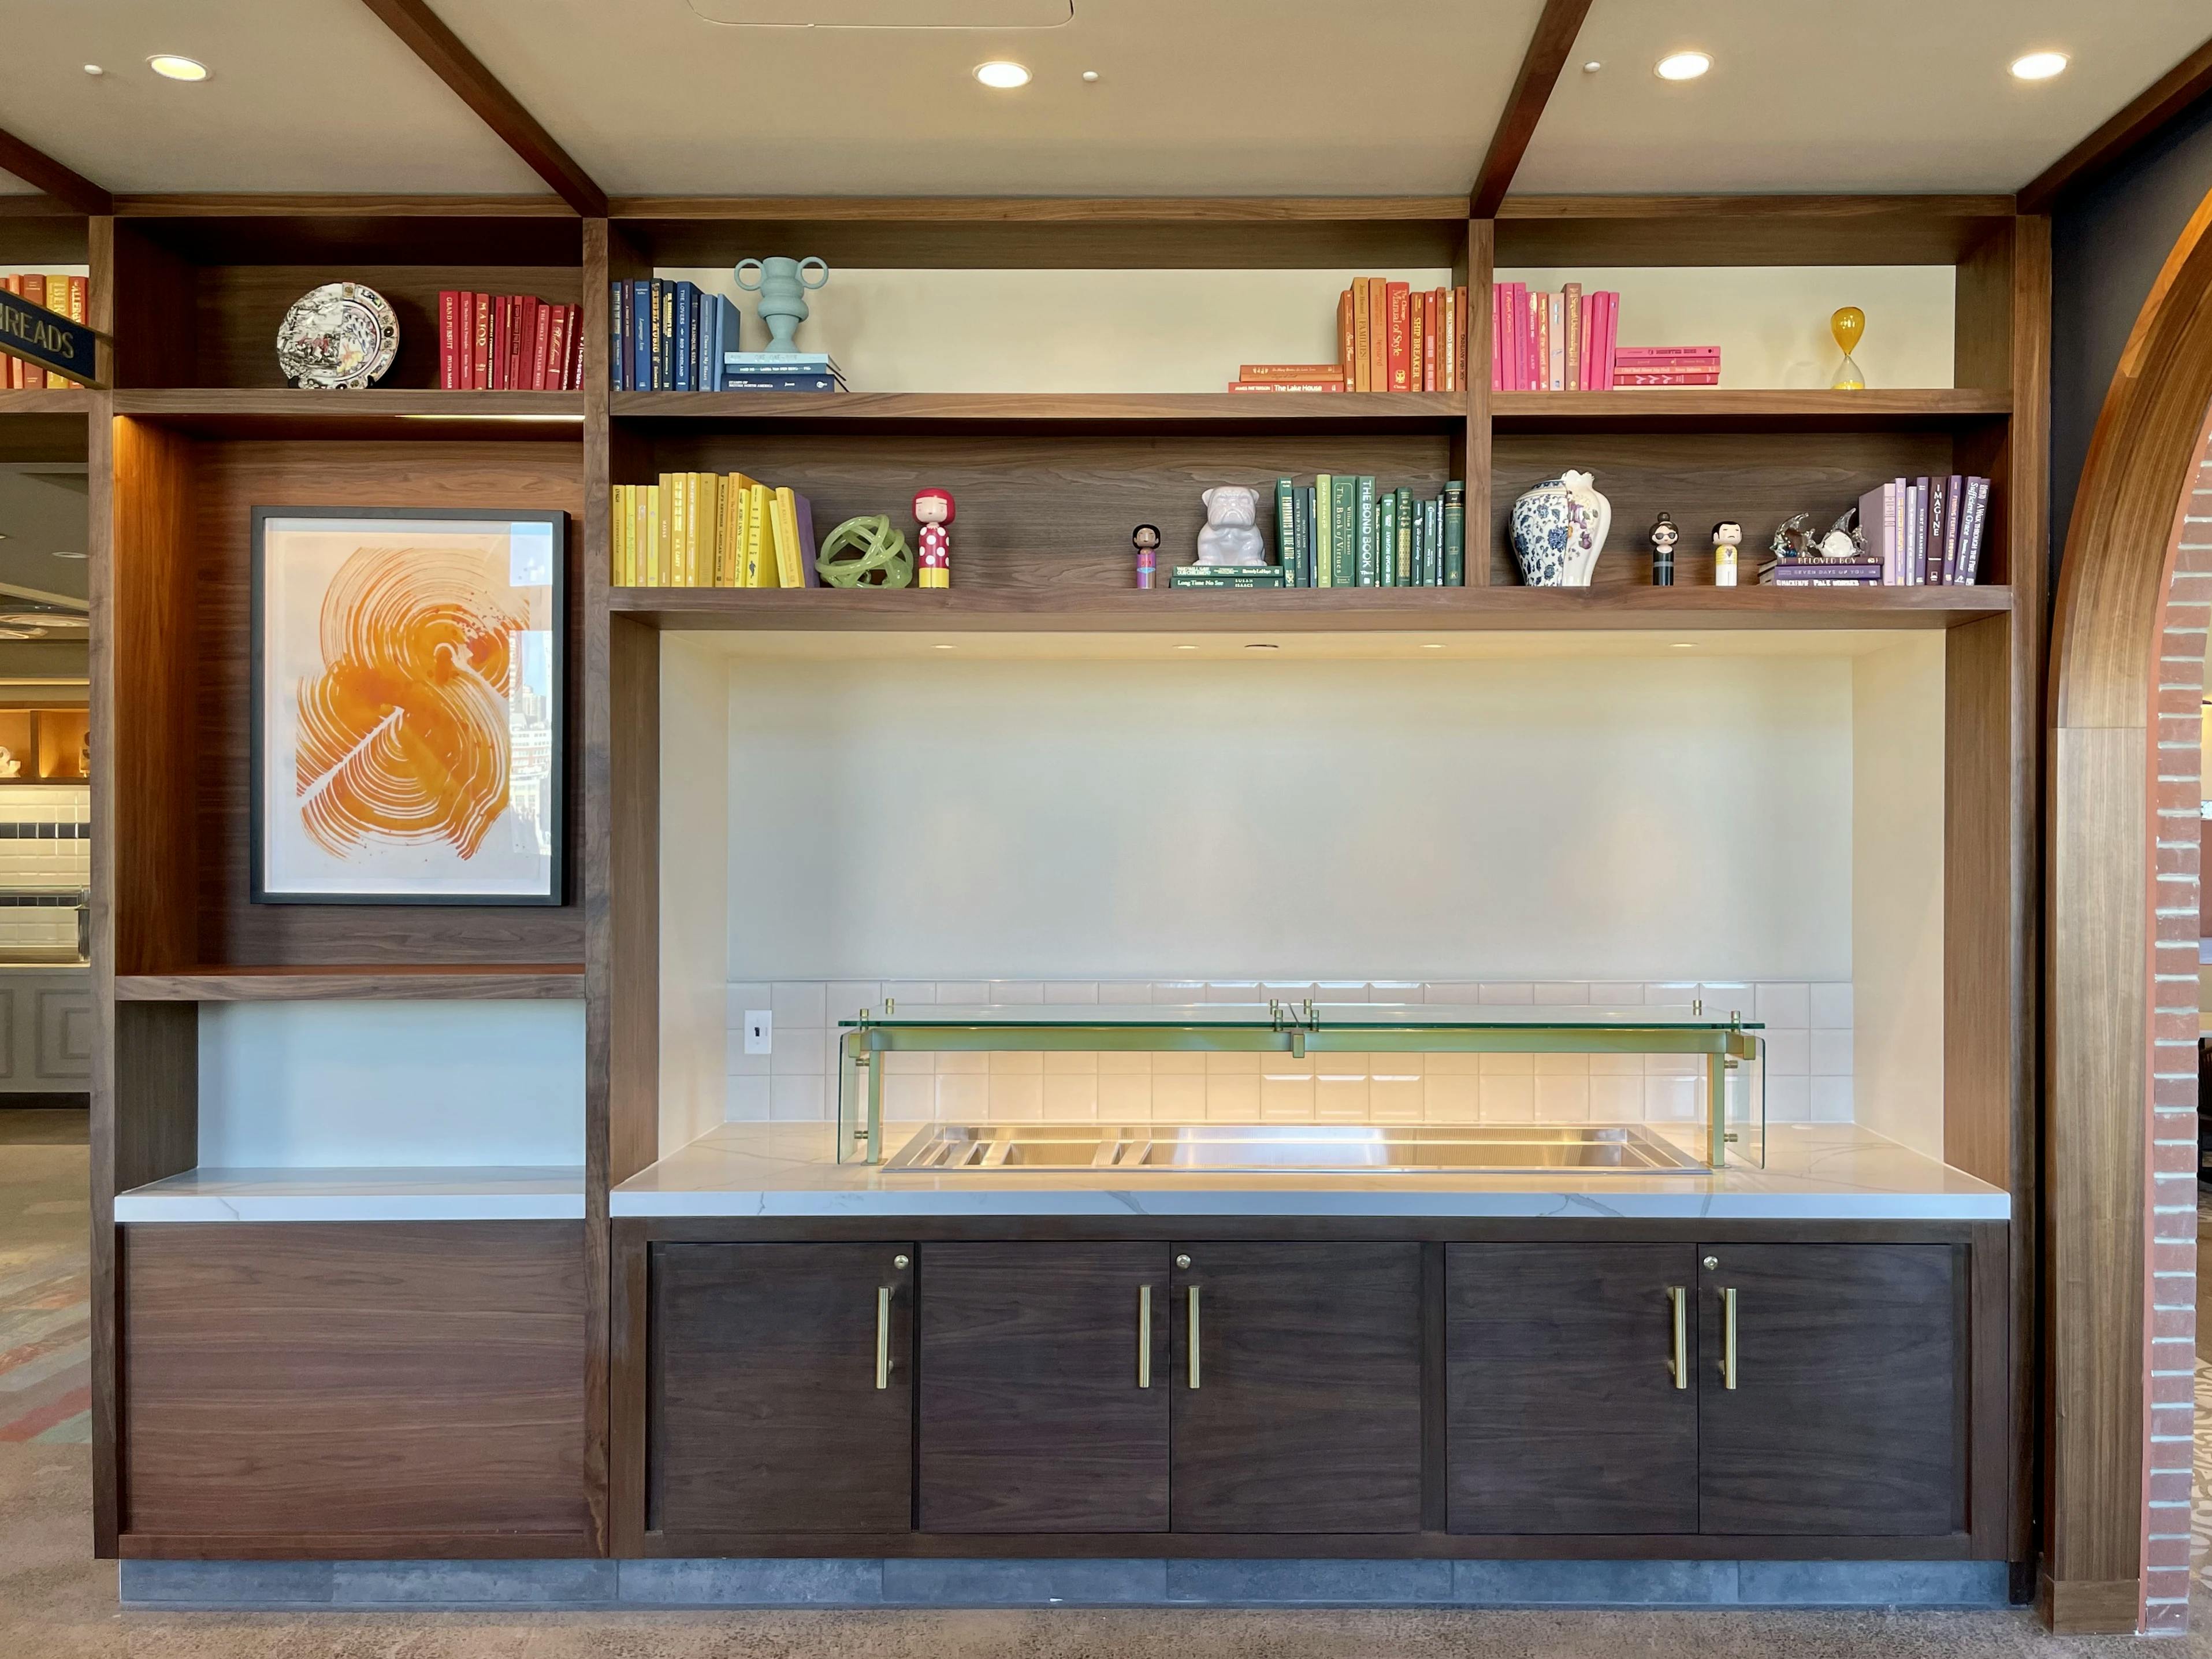 A painting by artist Linda Colletta installed within wooden shelving next to a buffet serving area.